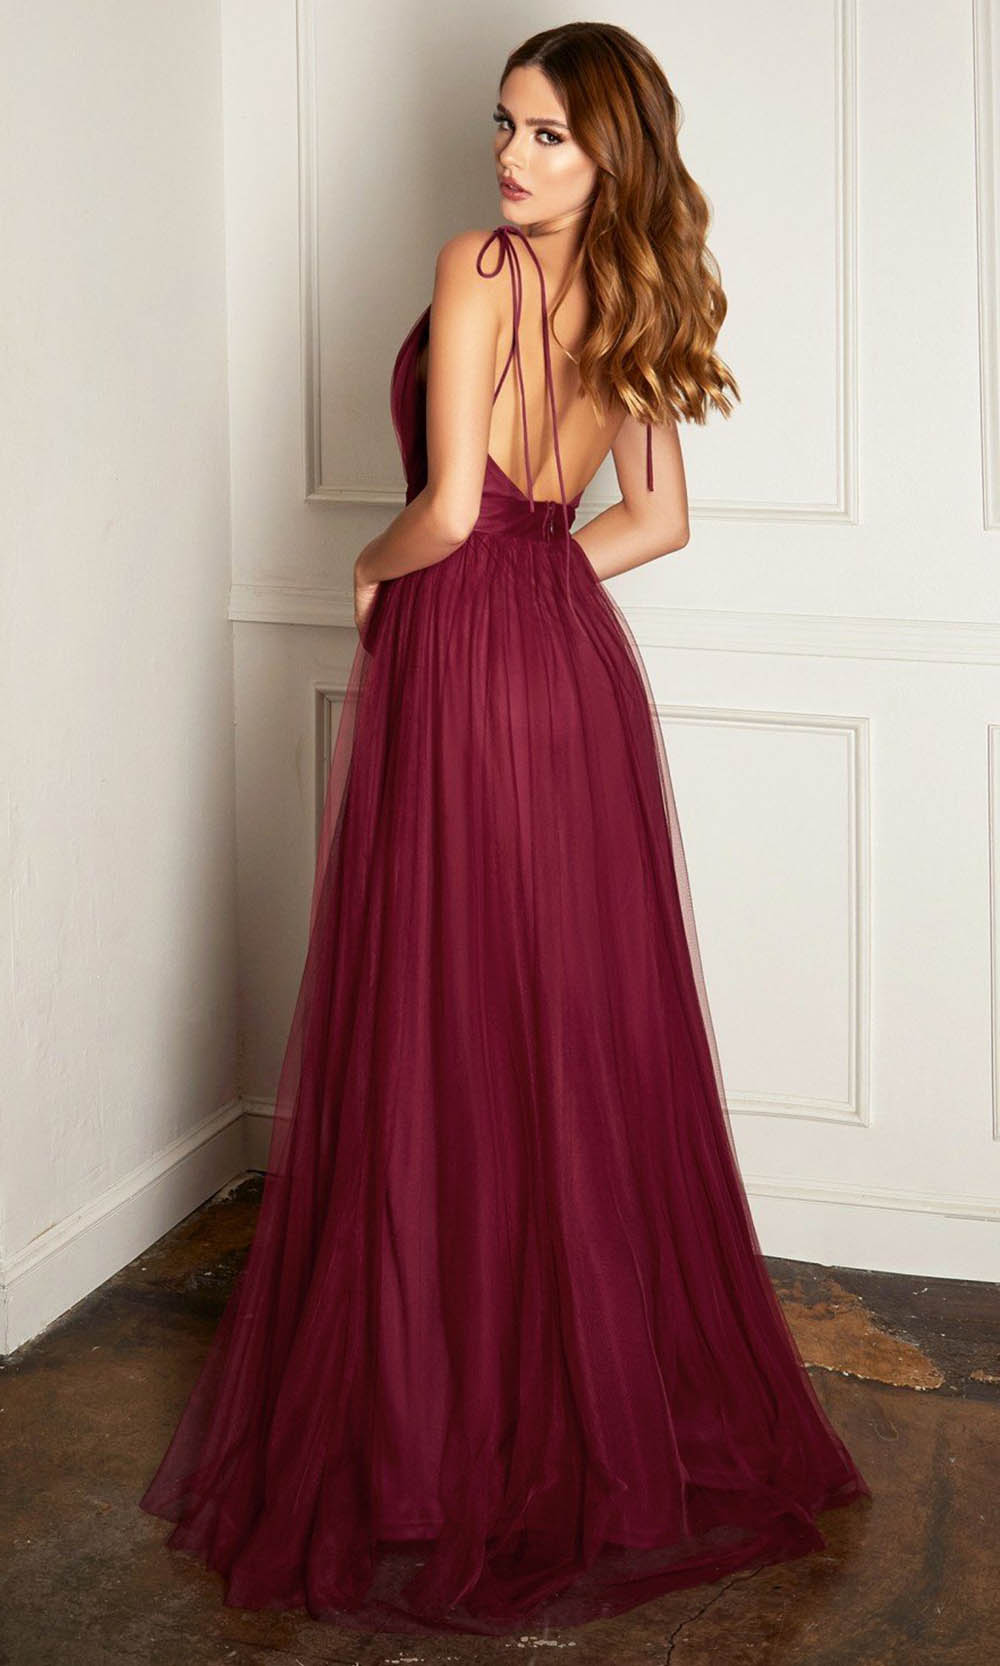 Ladivine - SE005P Plunging Tulle High Slit Gown In Burgundy